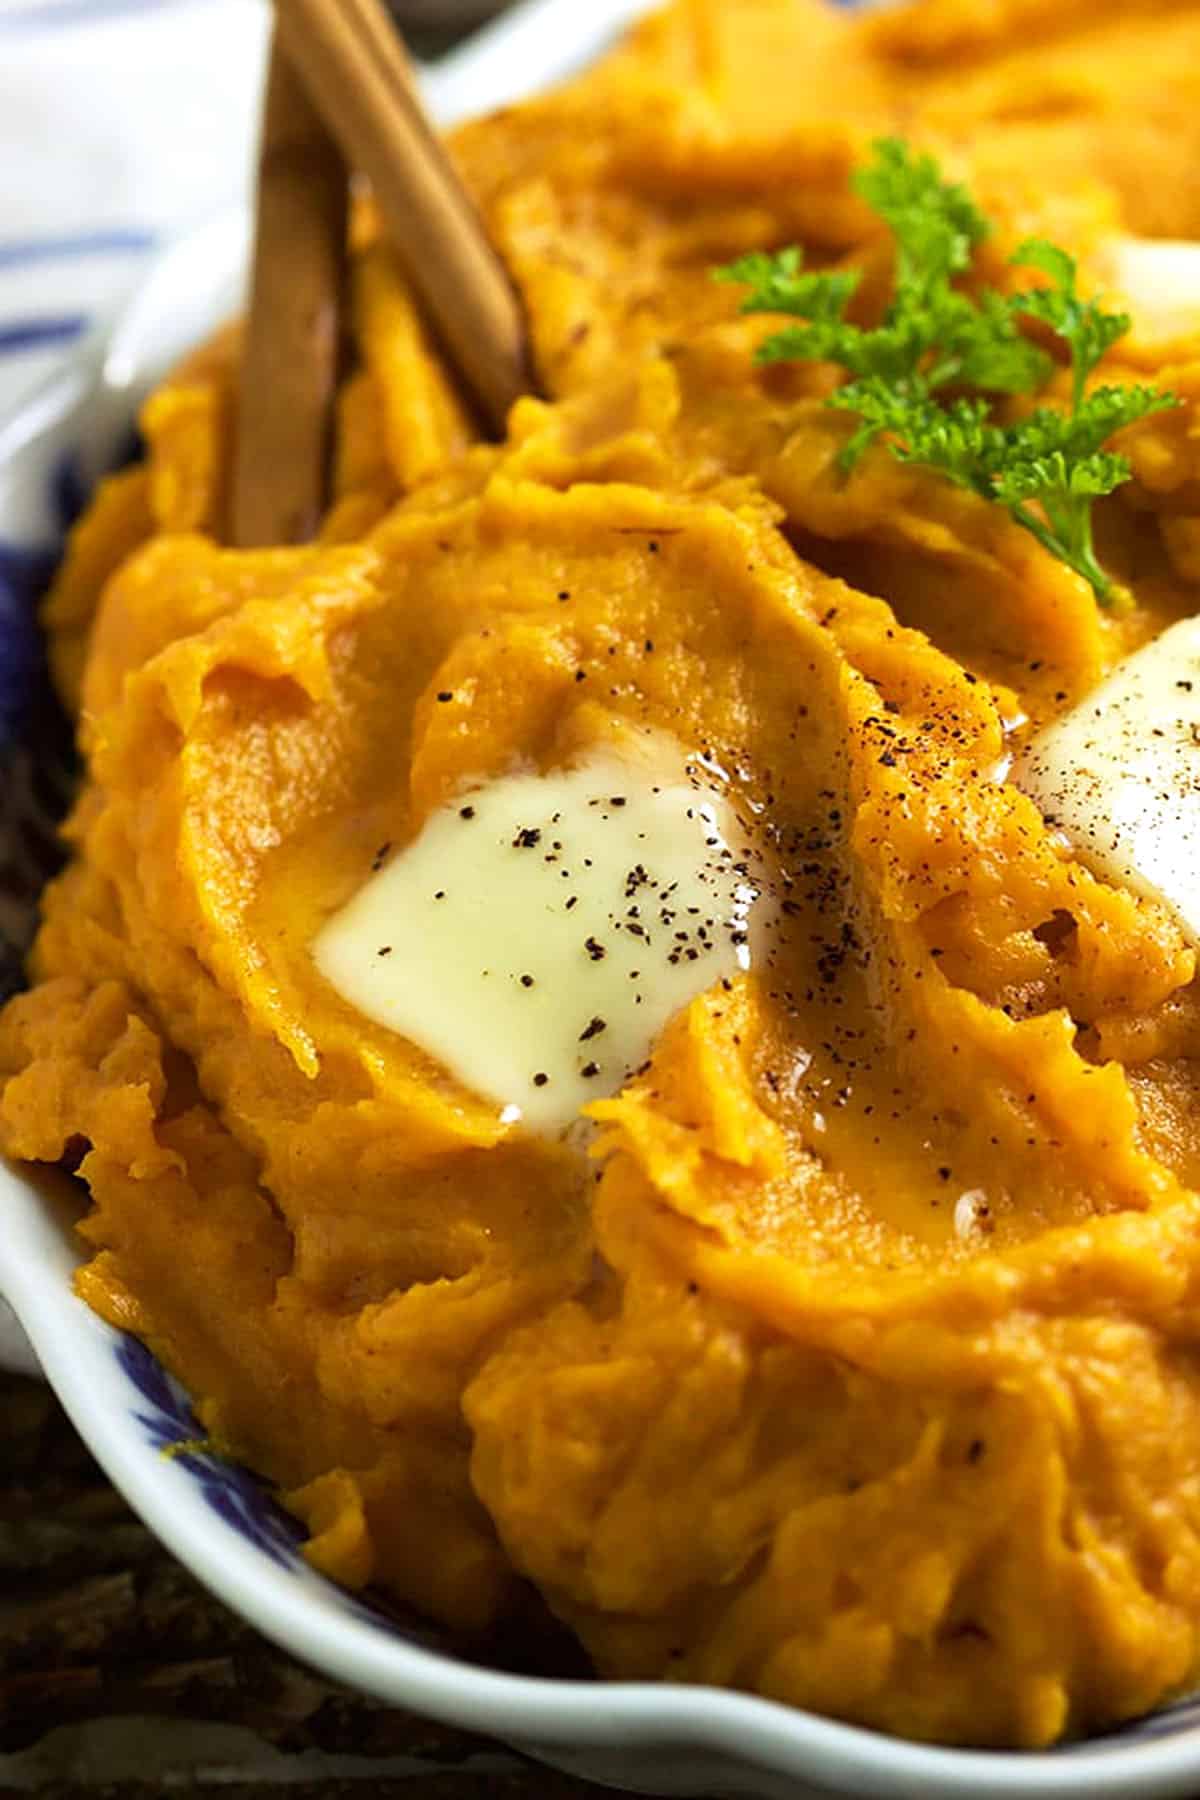 mashed sweet potatoes in a blue and white bowl with two cinnamon sticks on top.